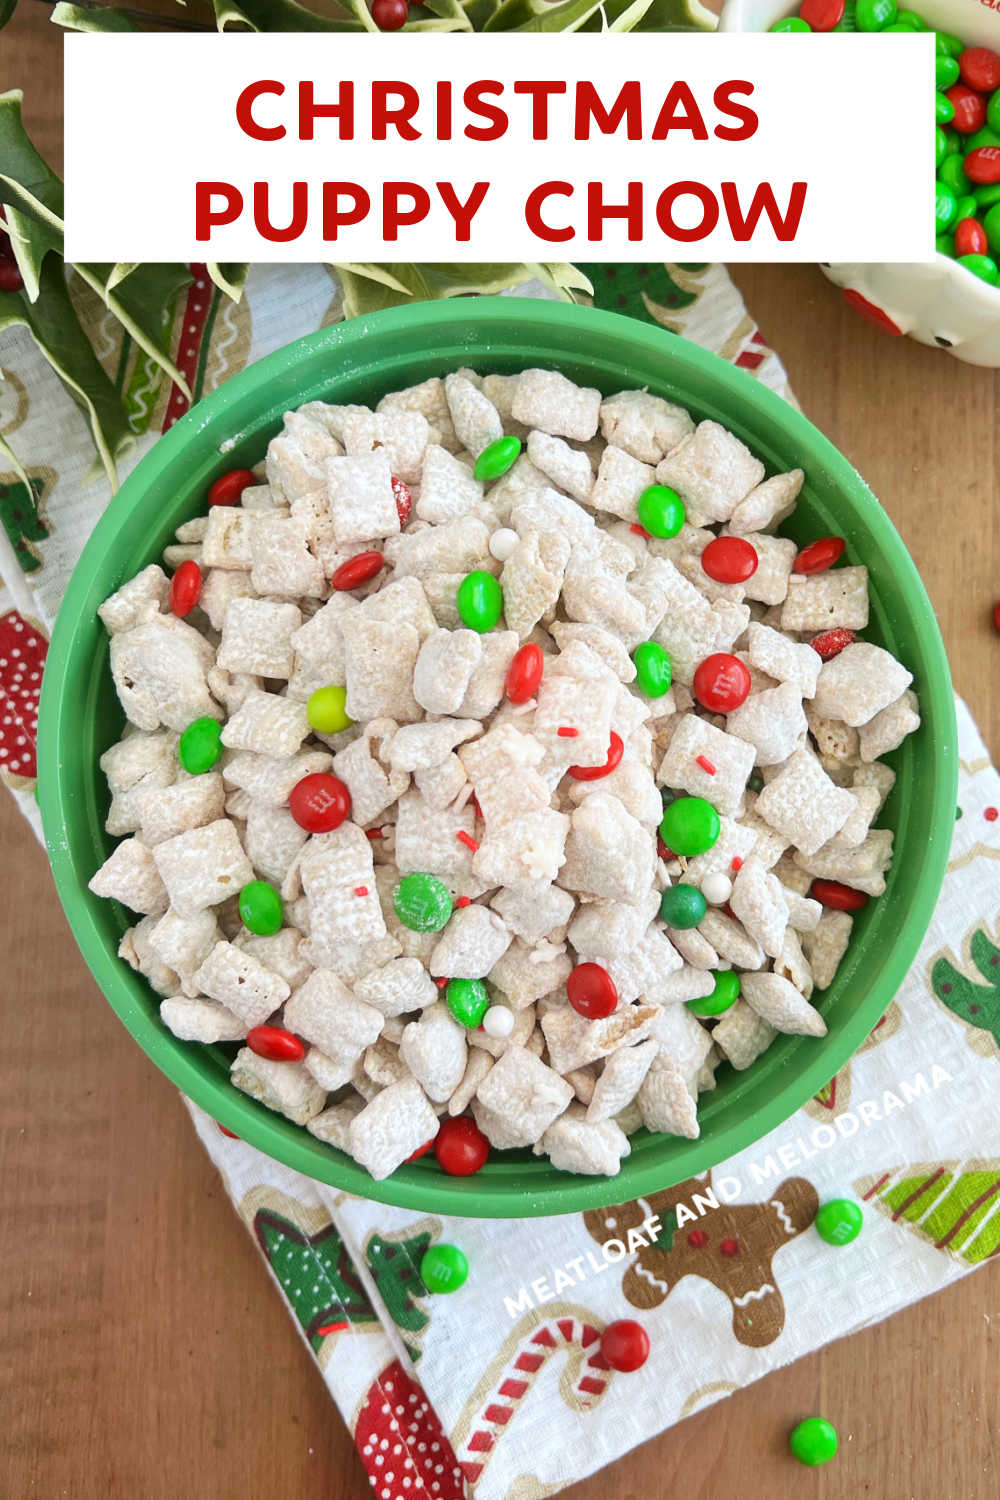 White Chocolate Puppy Chow (muddy buddies) is a delicious treat made with chex cereal, white chocolate, peanut butter and powdered sugar. This easy Christmas puppy chow or reindeer chow is the perfect snack for the holiday season! via @meamel